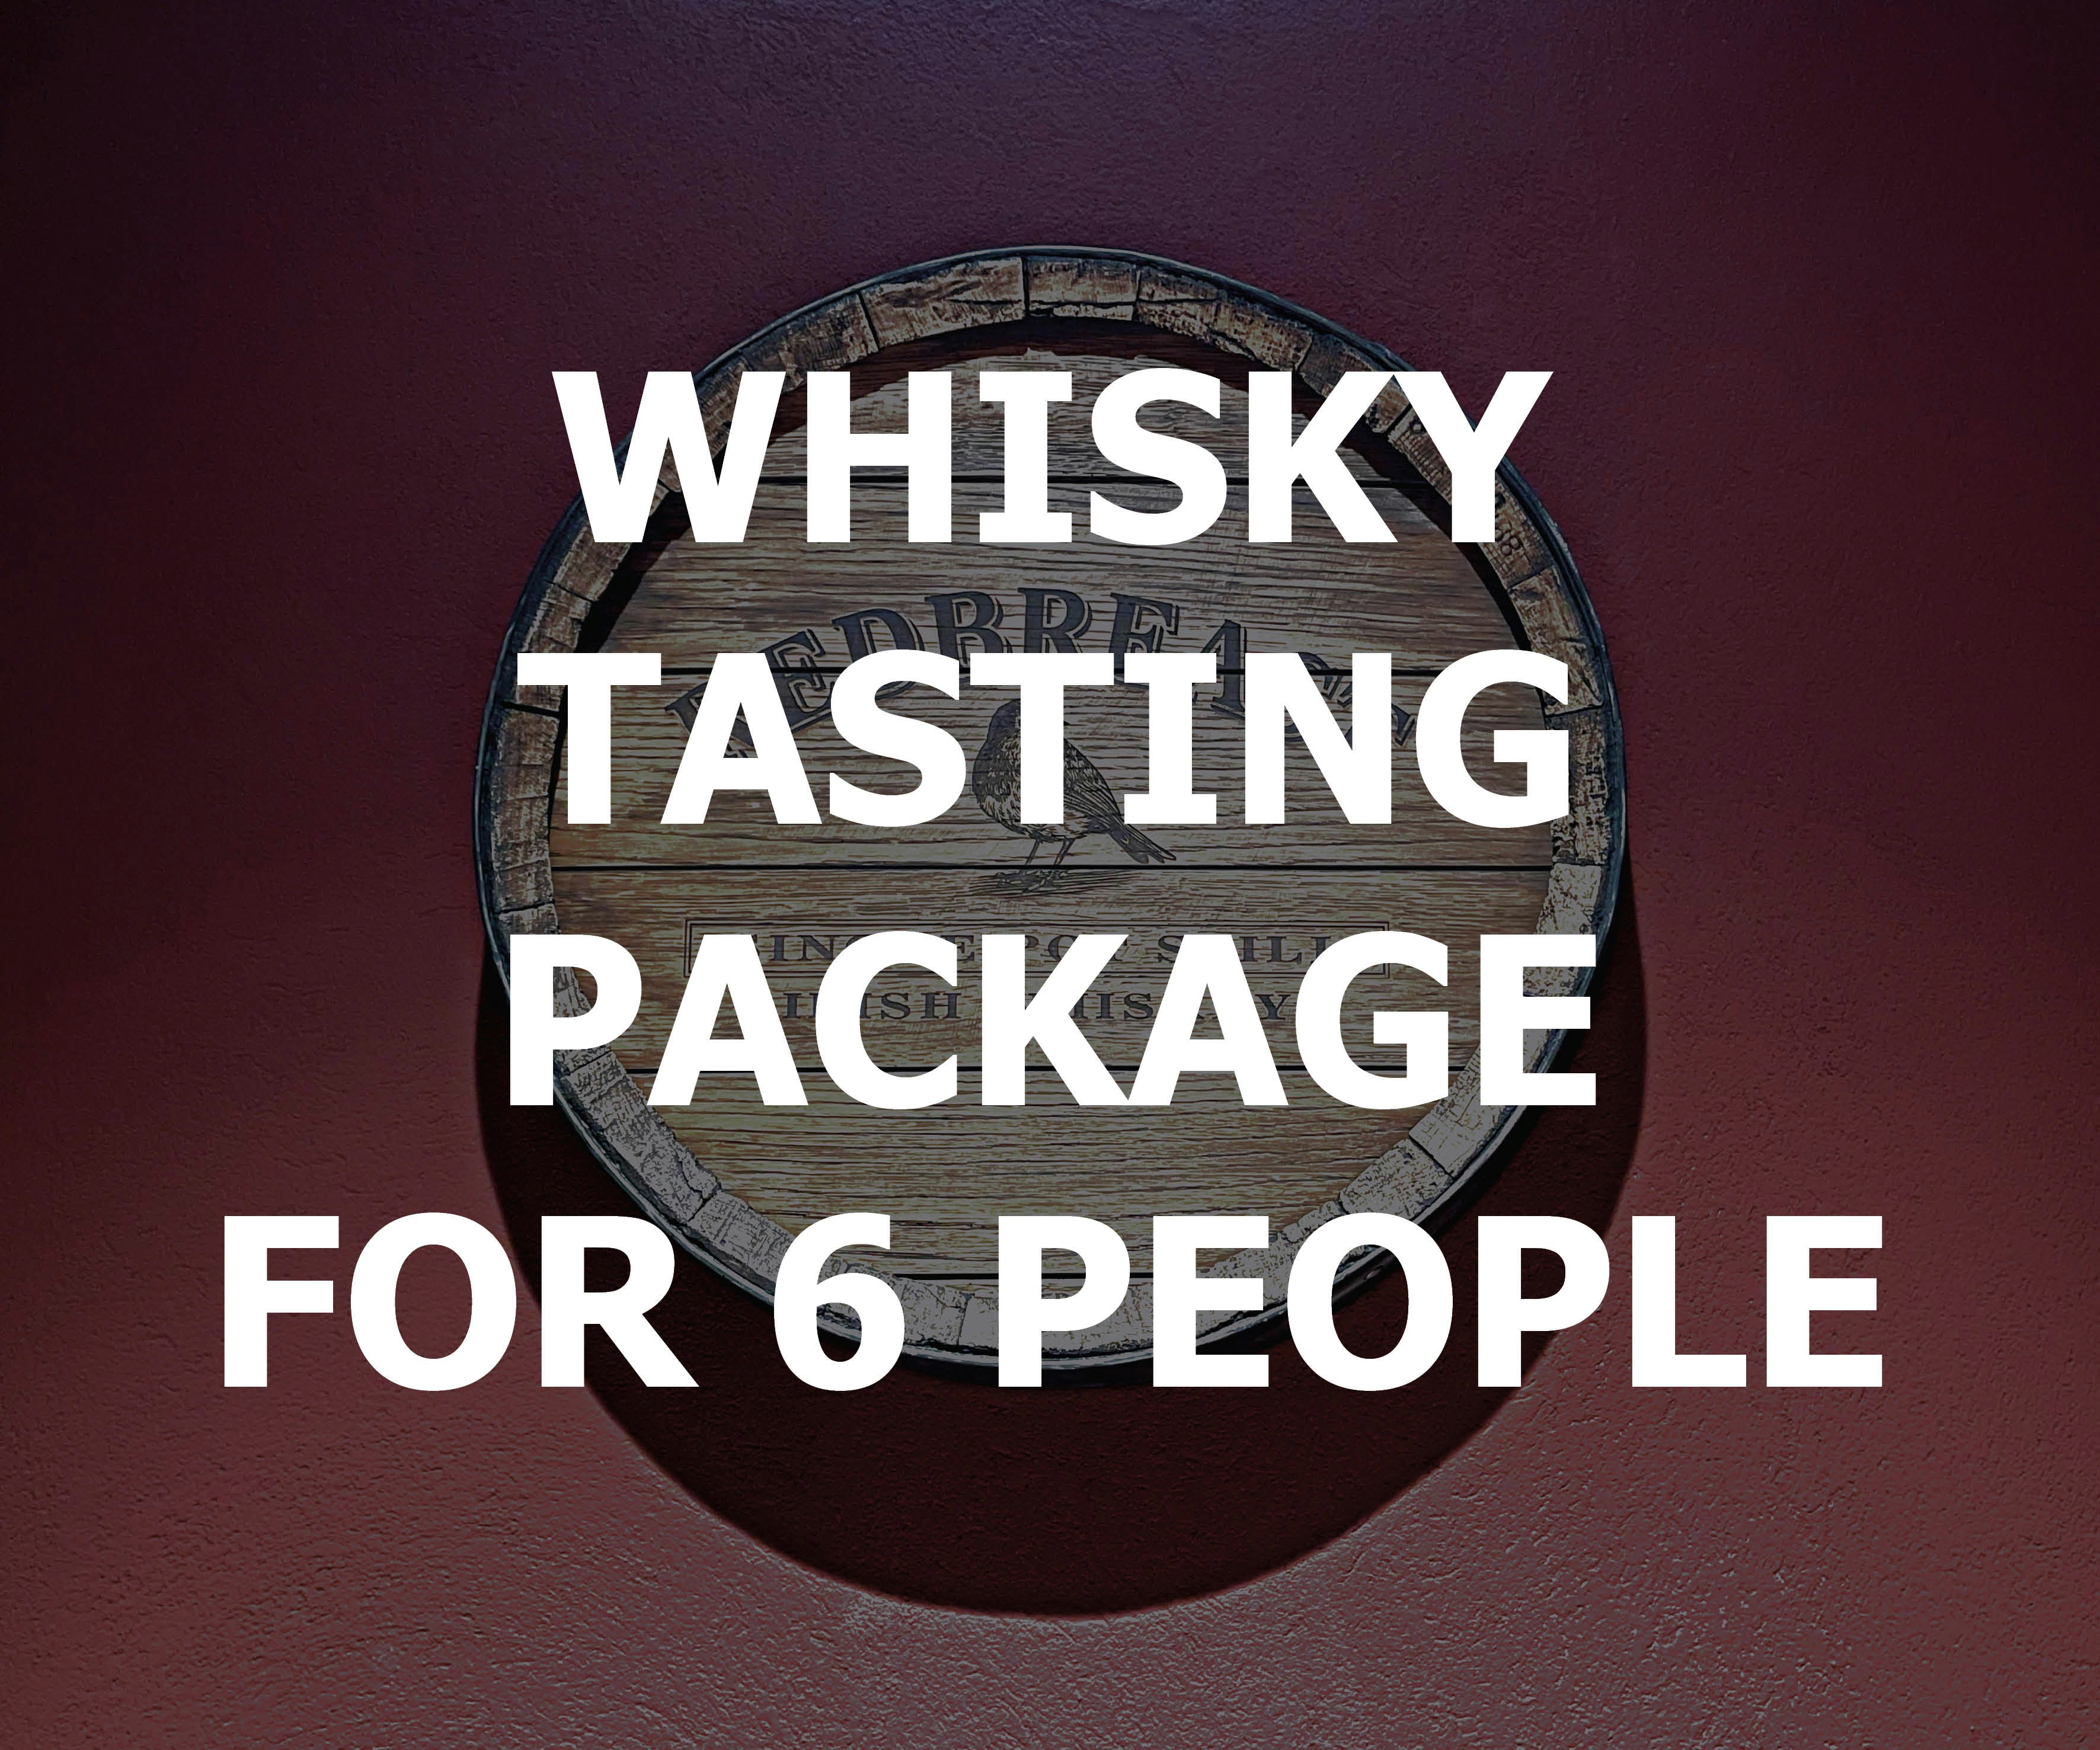 Whiskey from A-Z (theory & tasting) package for 6 people